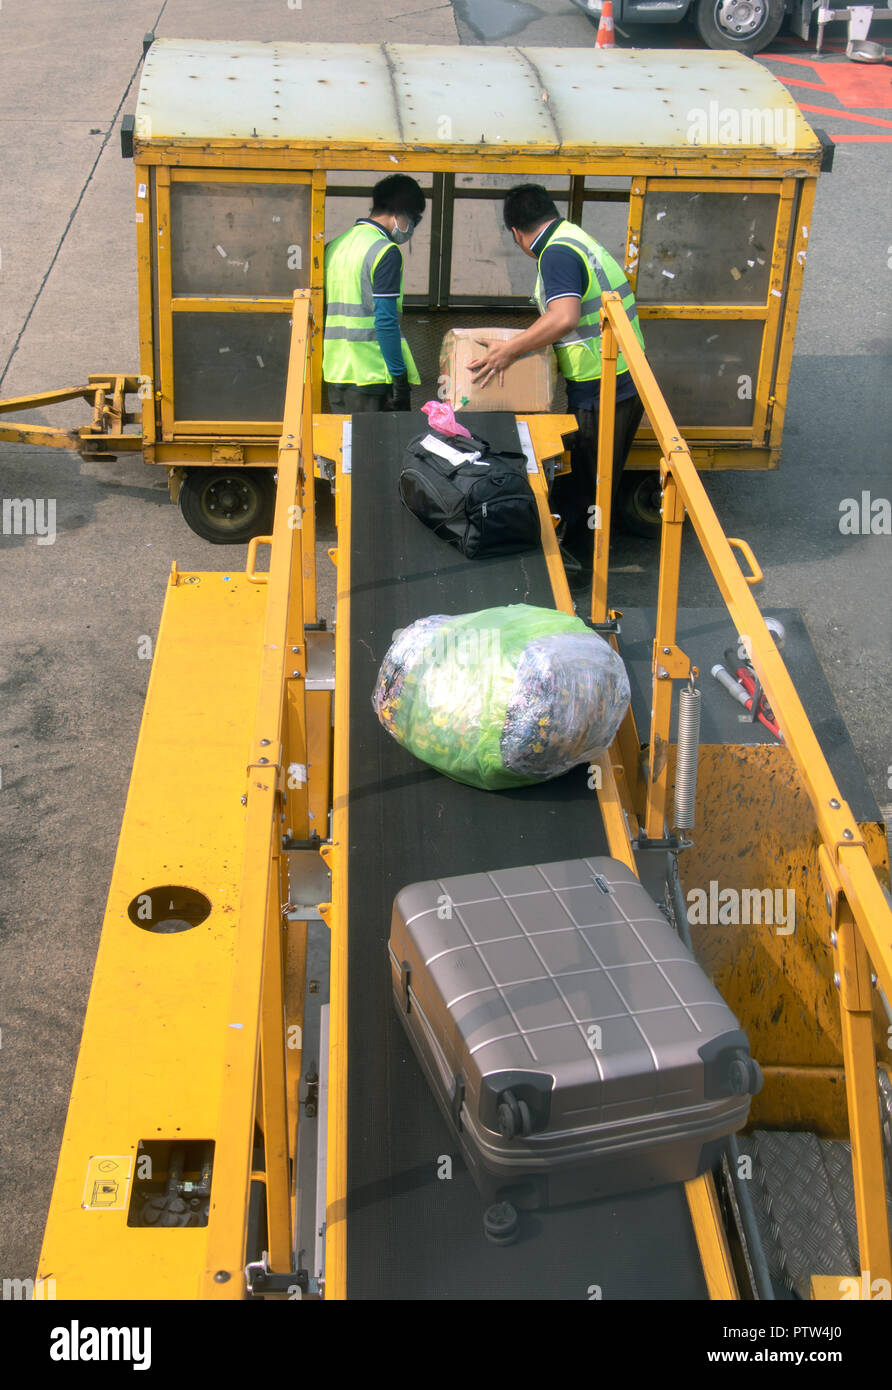 The men serve the conveyor belt with the luggage going from the plane. Stock Photo